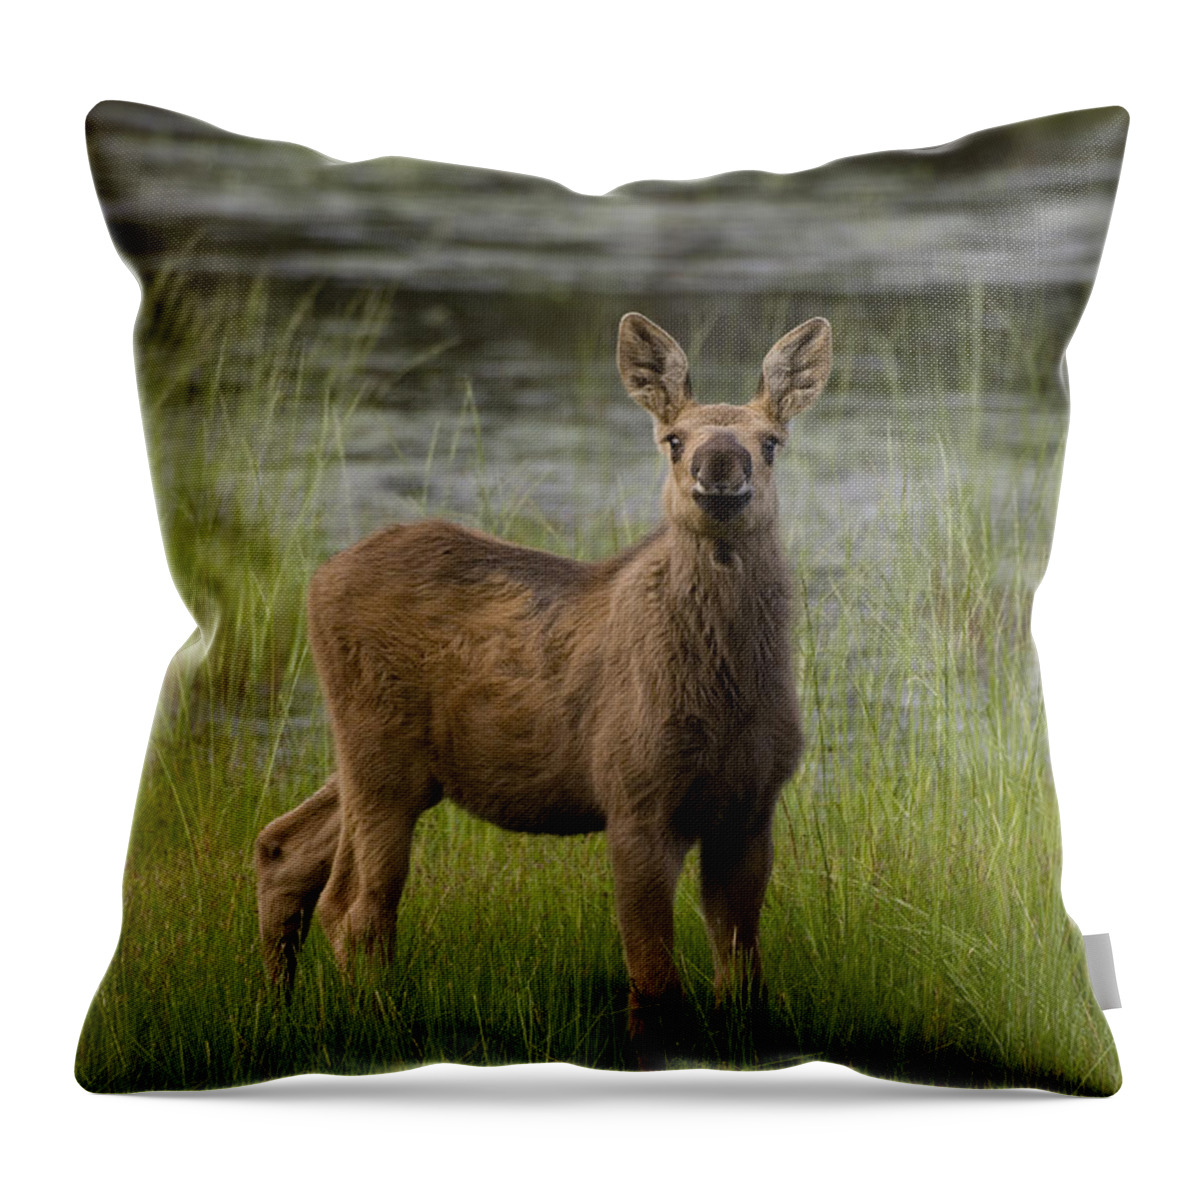 Feb0514 Throw Pillow featuring the photograph Alaska Moose Calf Standing In Marsh by Michael Quinton